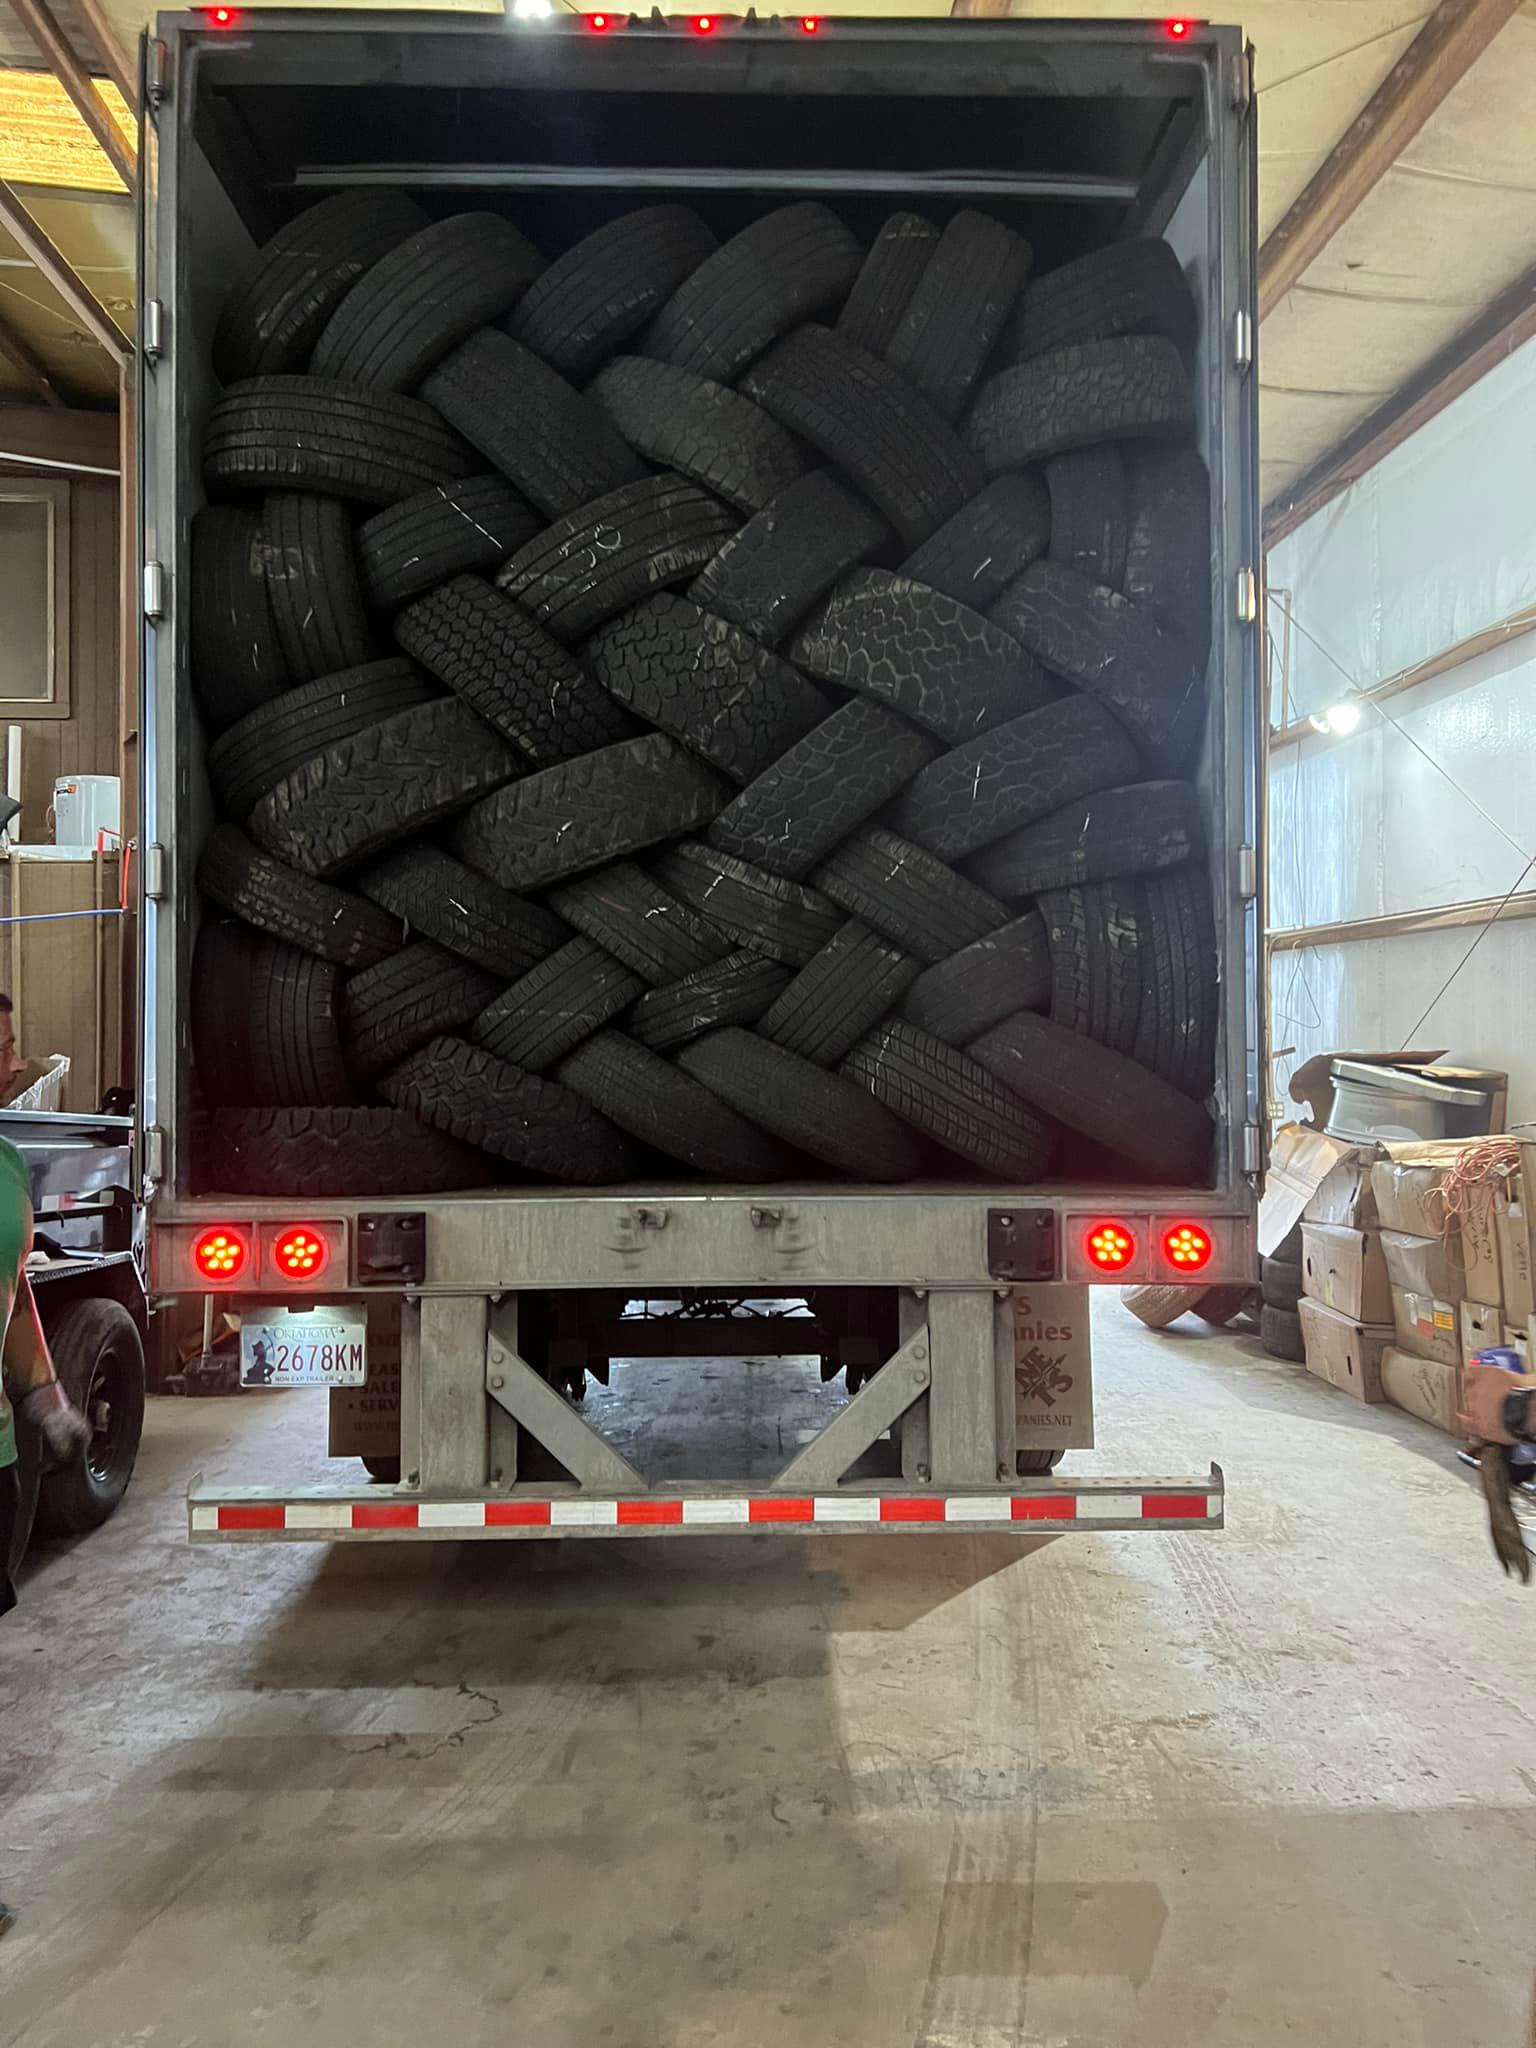 Stop by for a tire shop you can count on! Bayou Tire Connection Slidell (985)205-4904